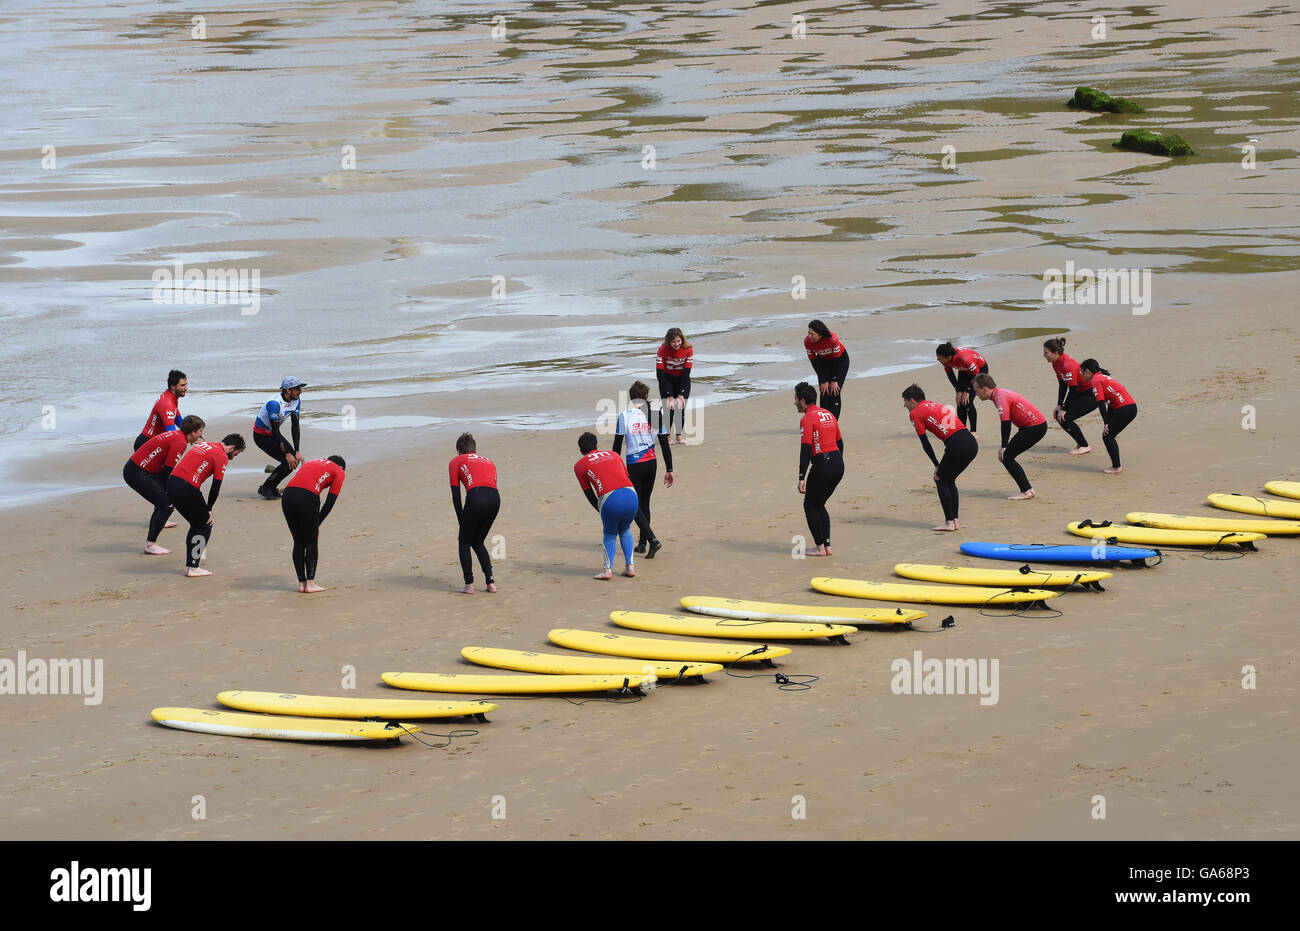 Surfers surfing school lesson with surf board Biarritz France Stock Photo